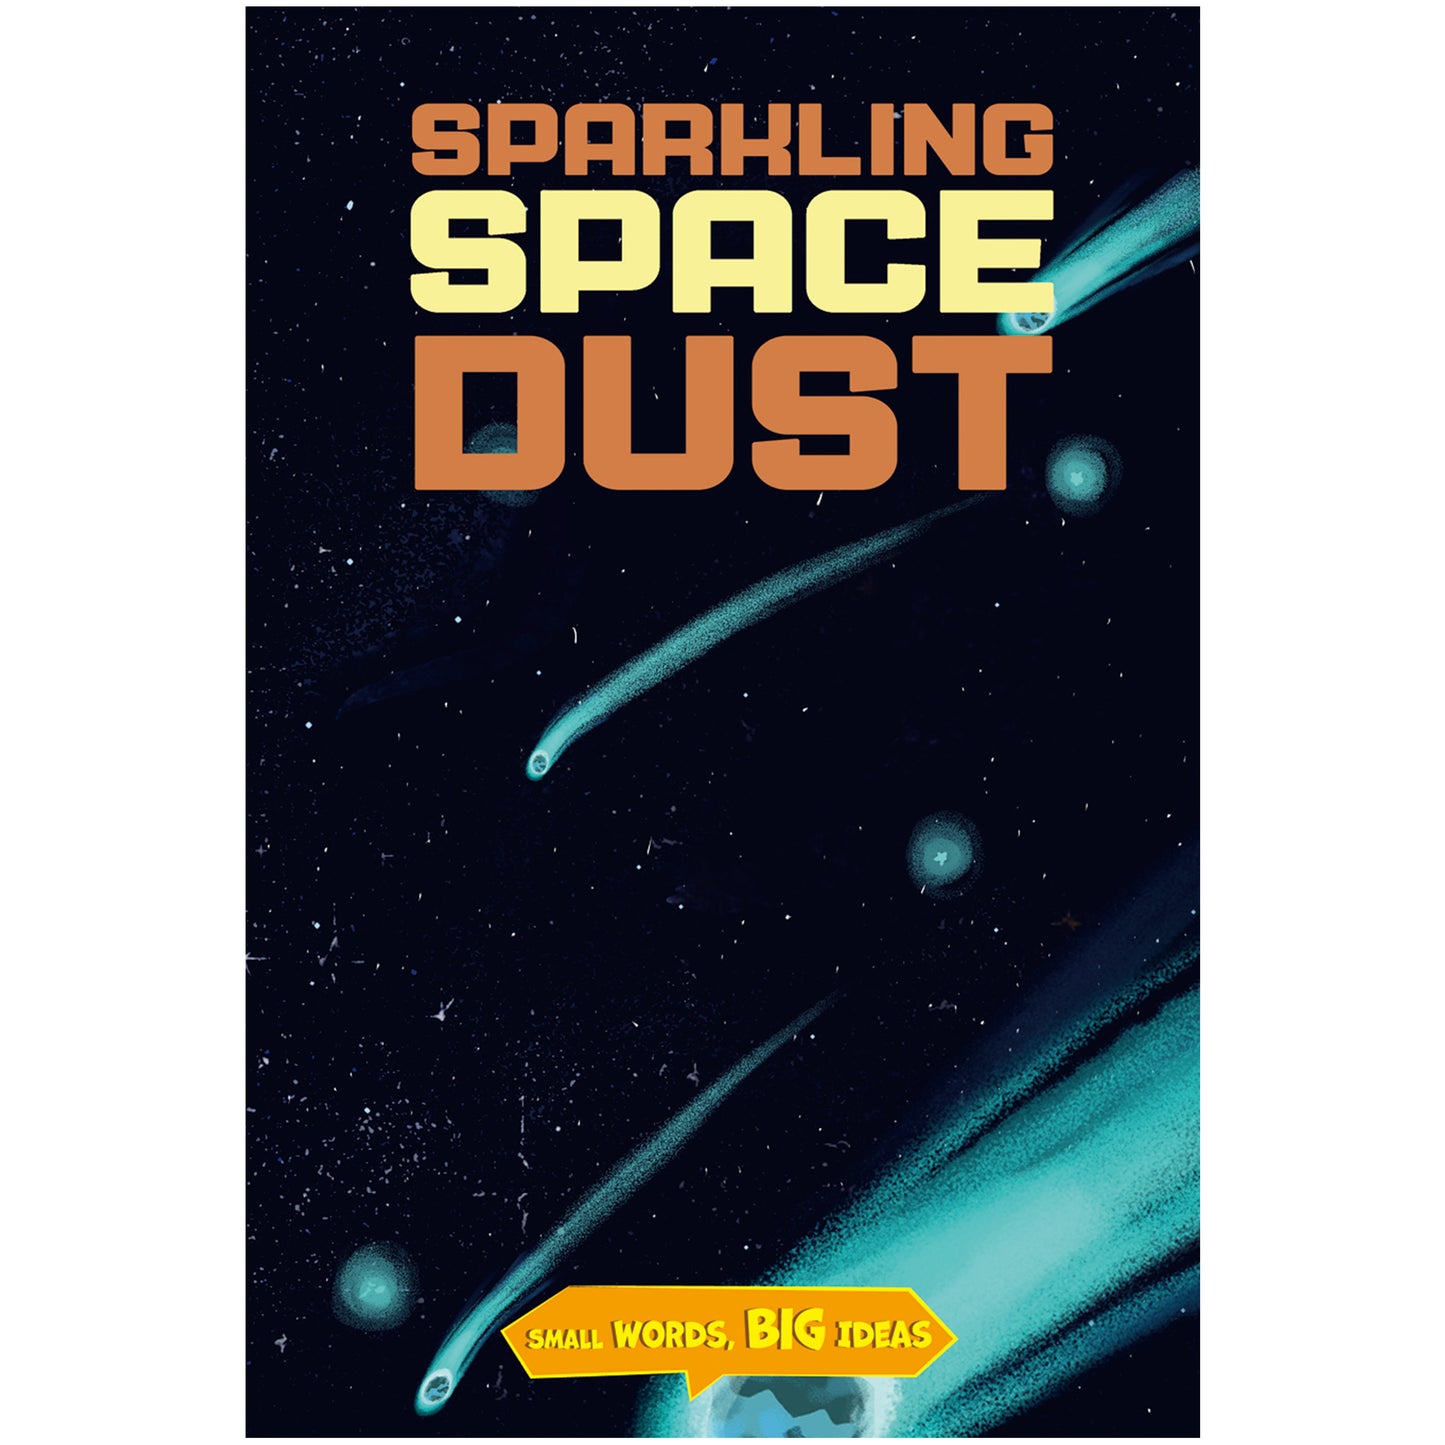 Sparkling Space Dust